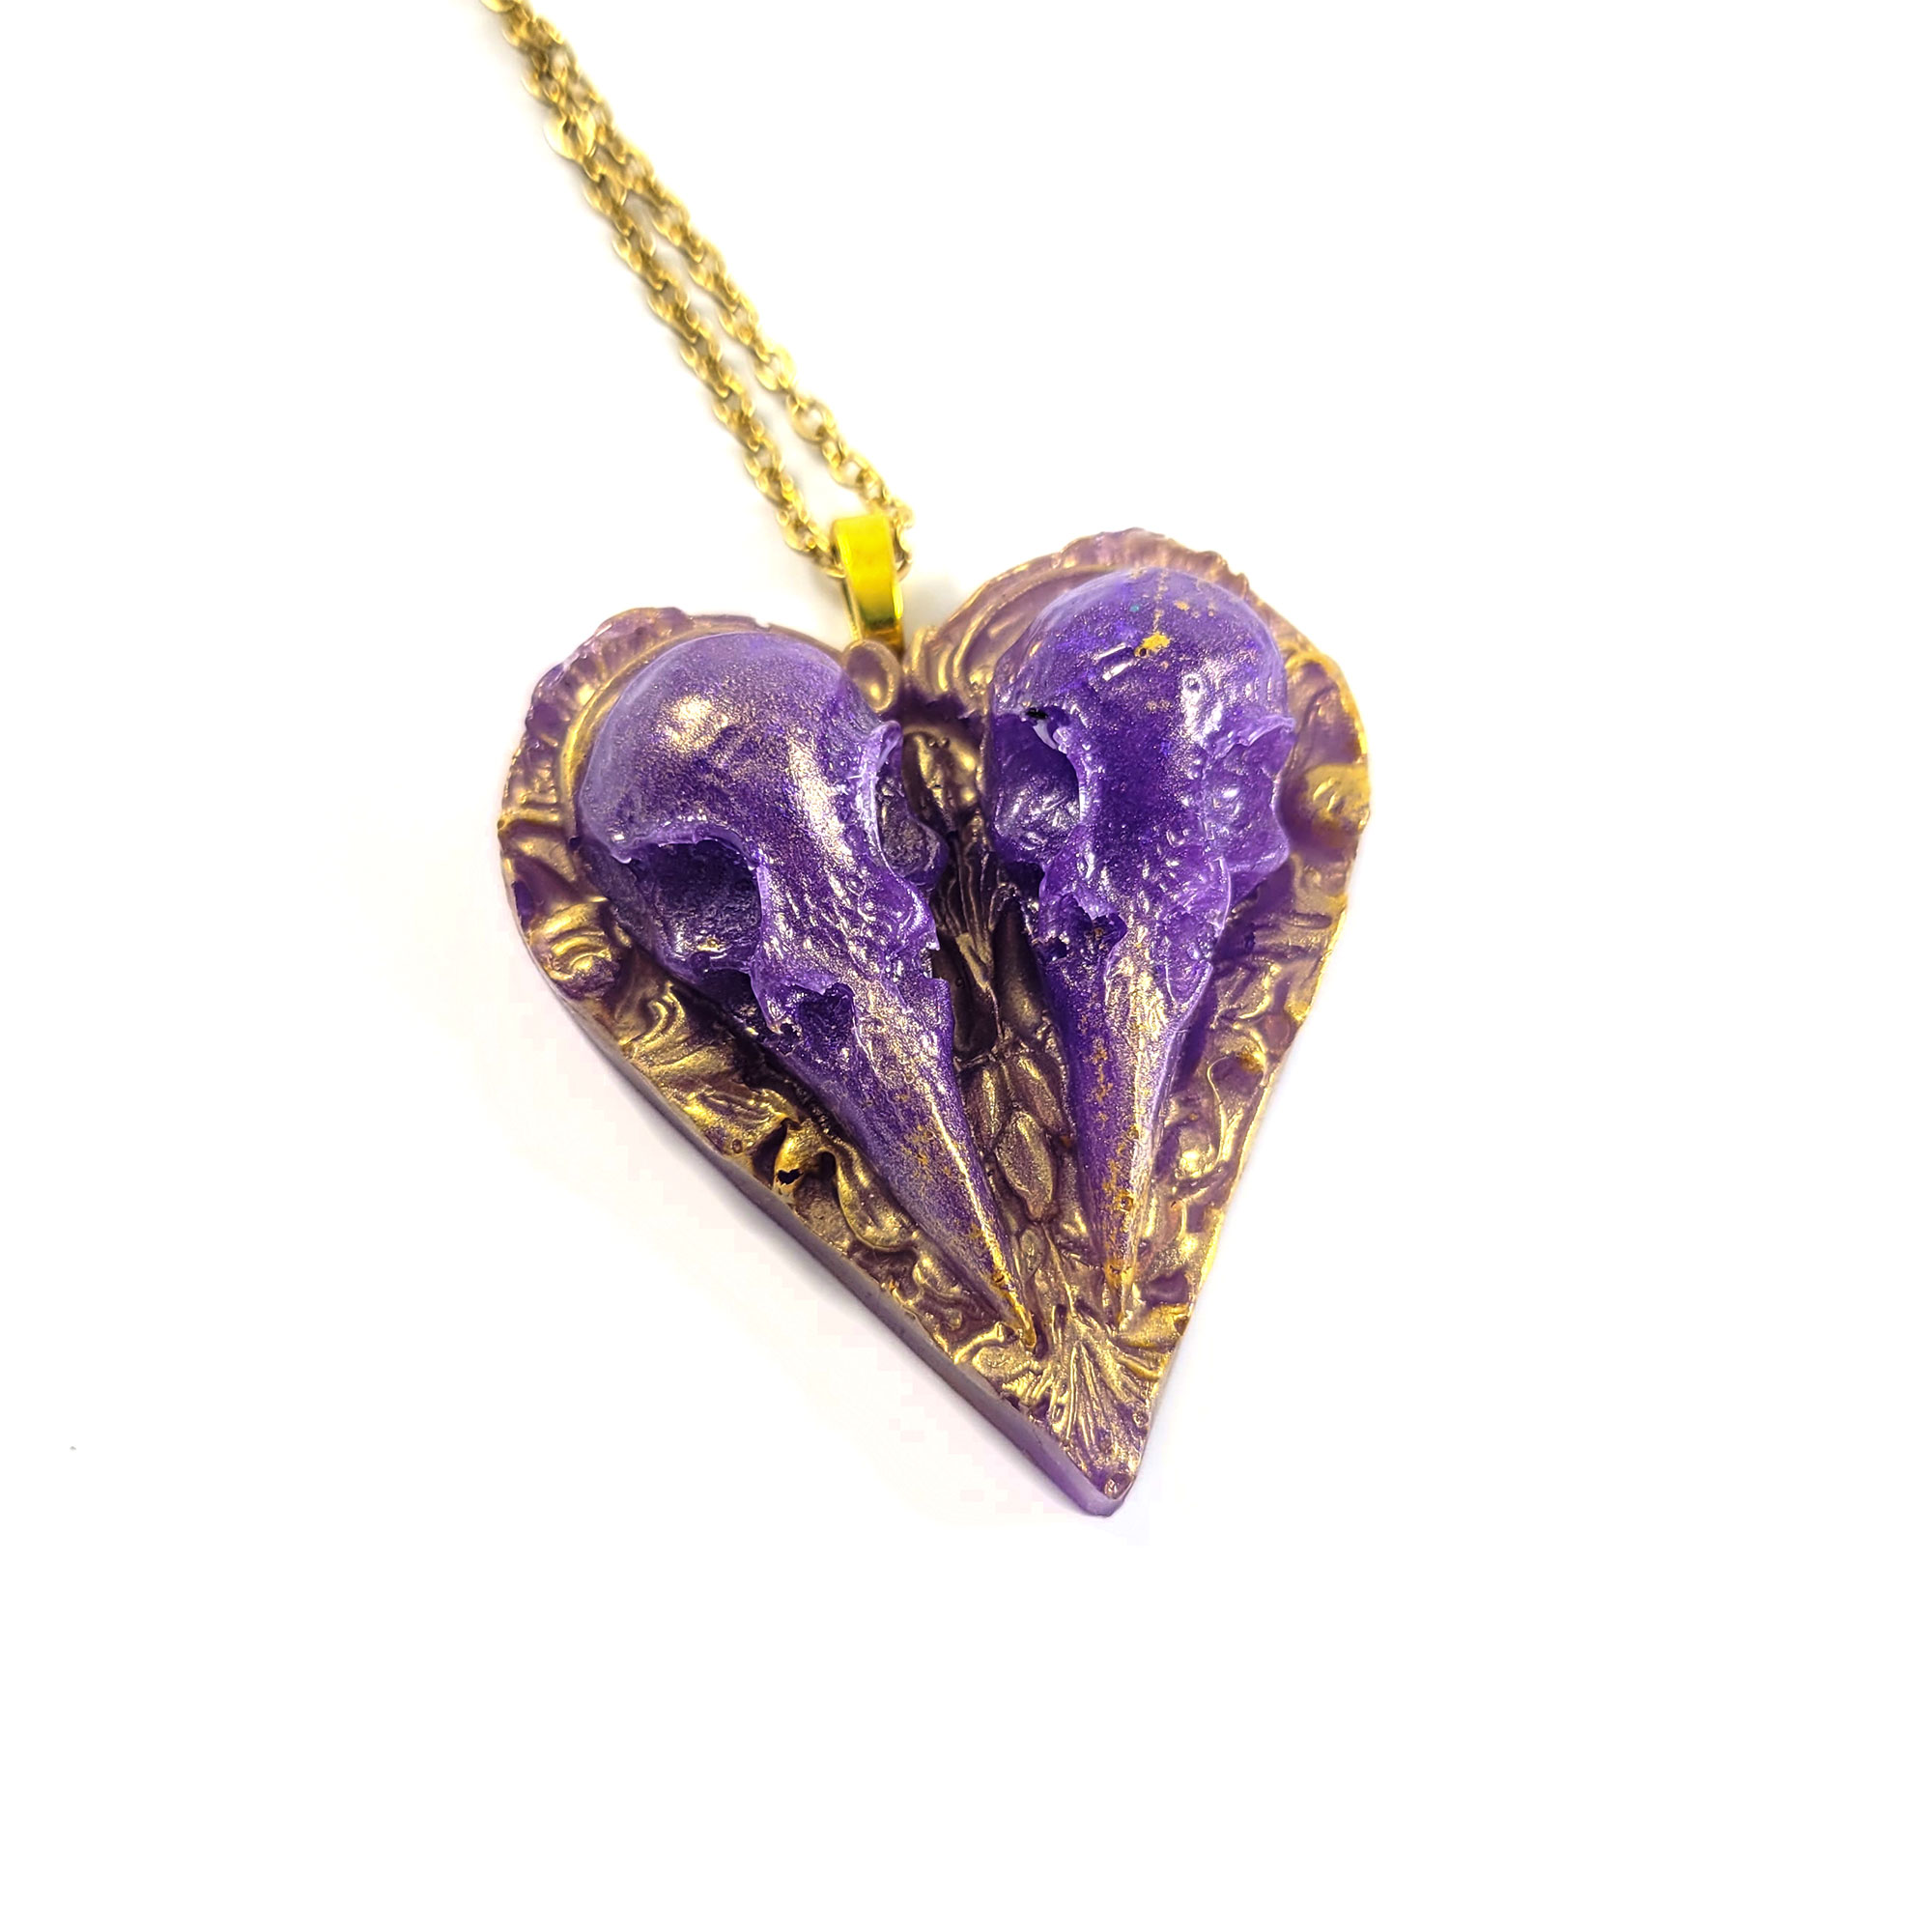 Double Raven Skull Cameo Necklace in Purple & Gold by Wilde Designs